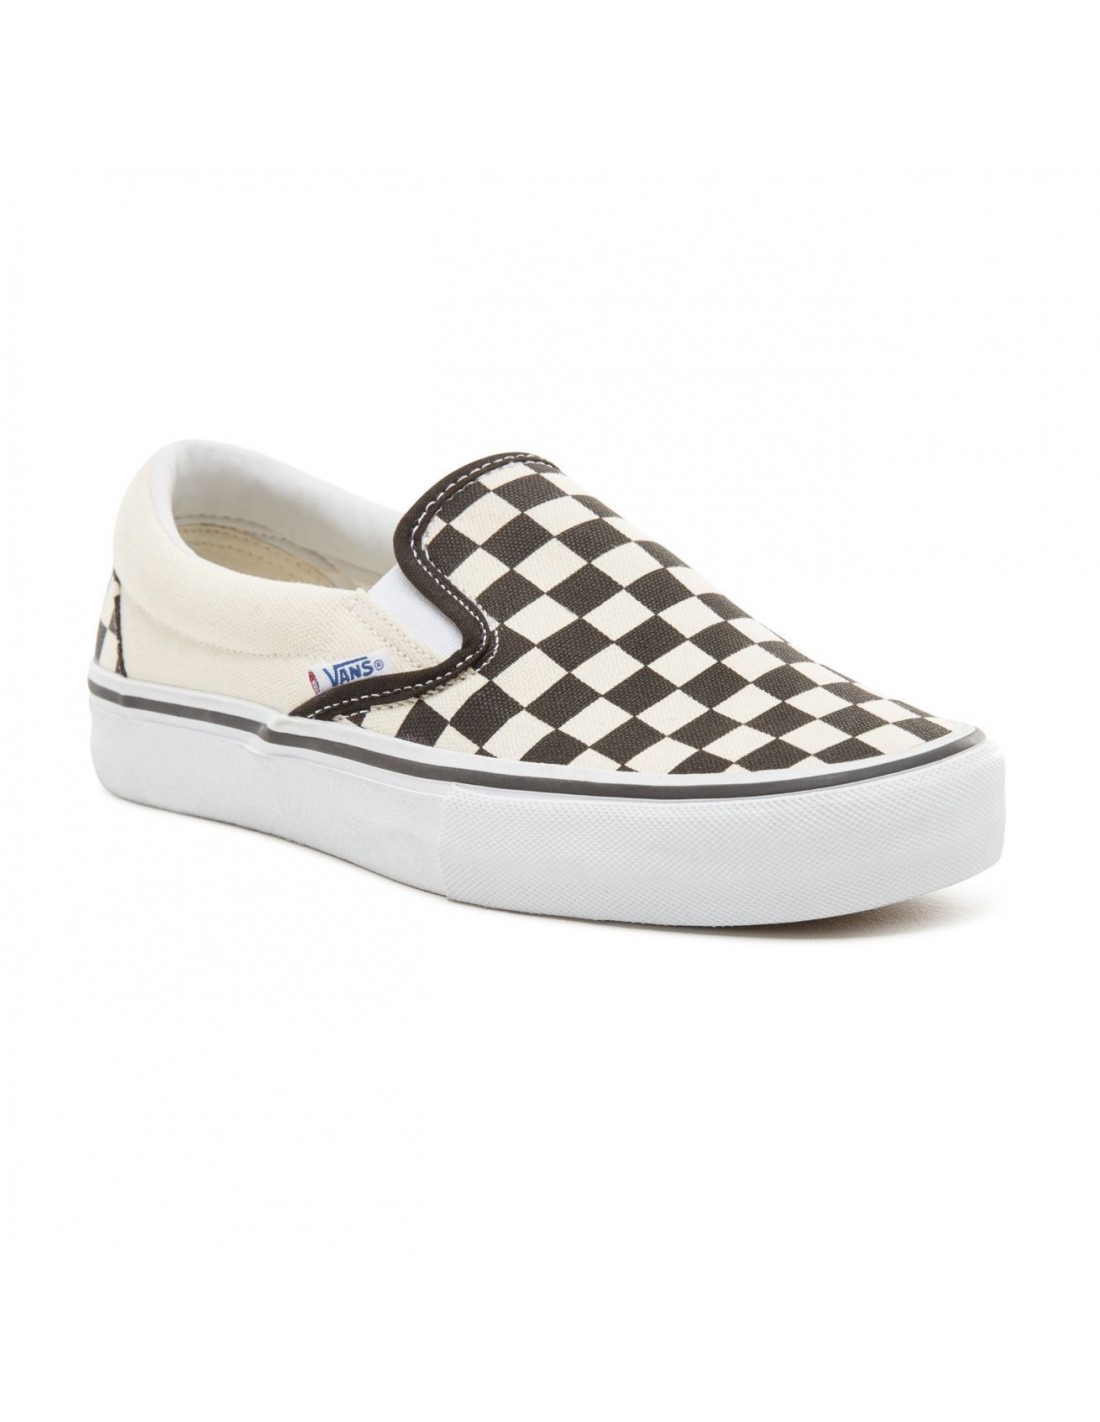 Vans Classic Checkerboard Slip-Ons In Yellow Sz M 8.5 / W 10 New In Box